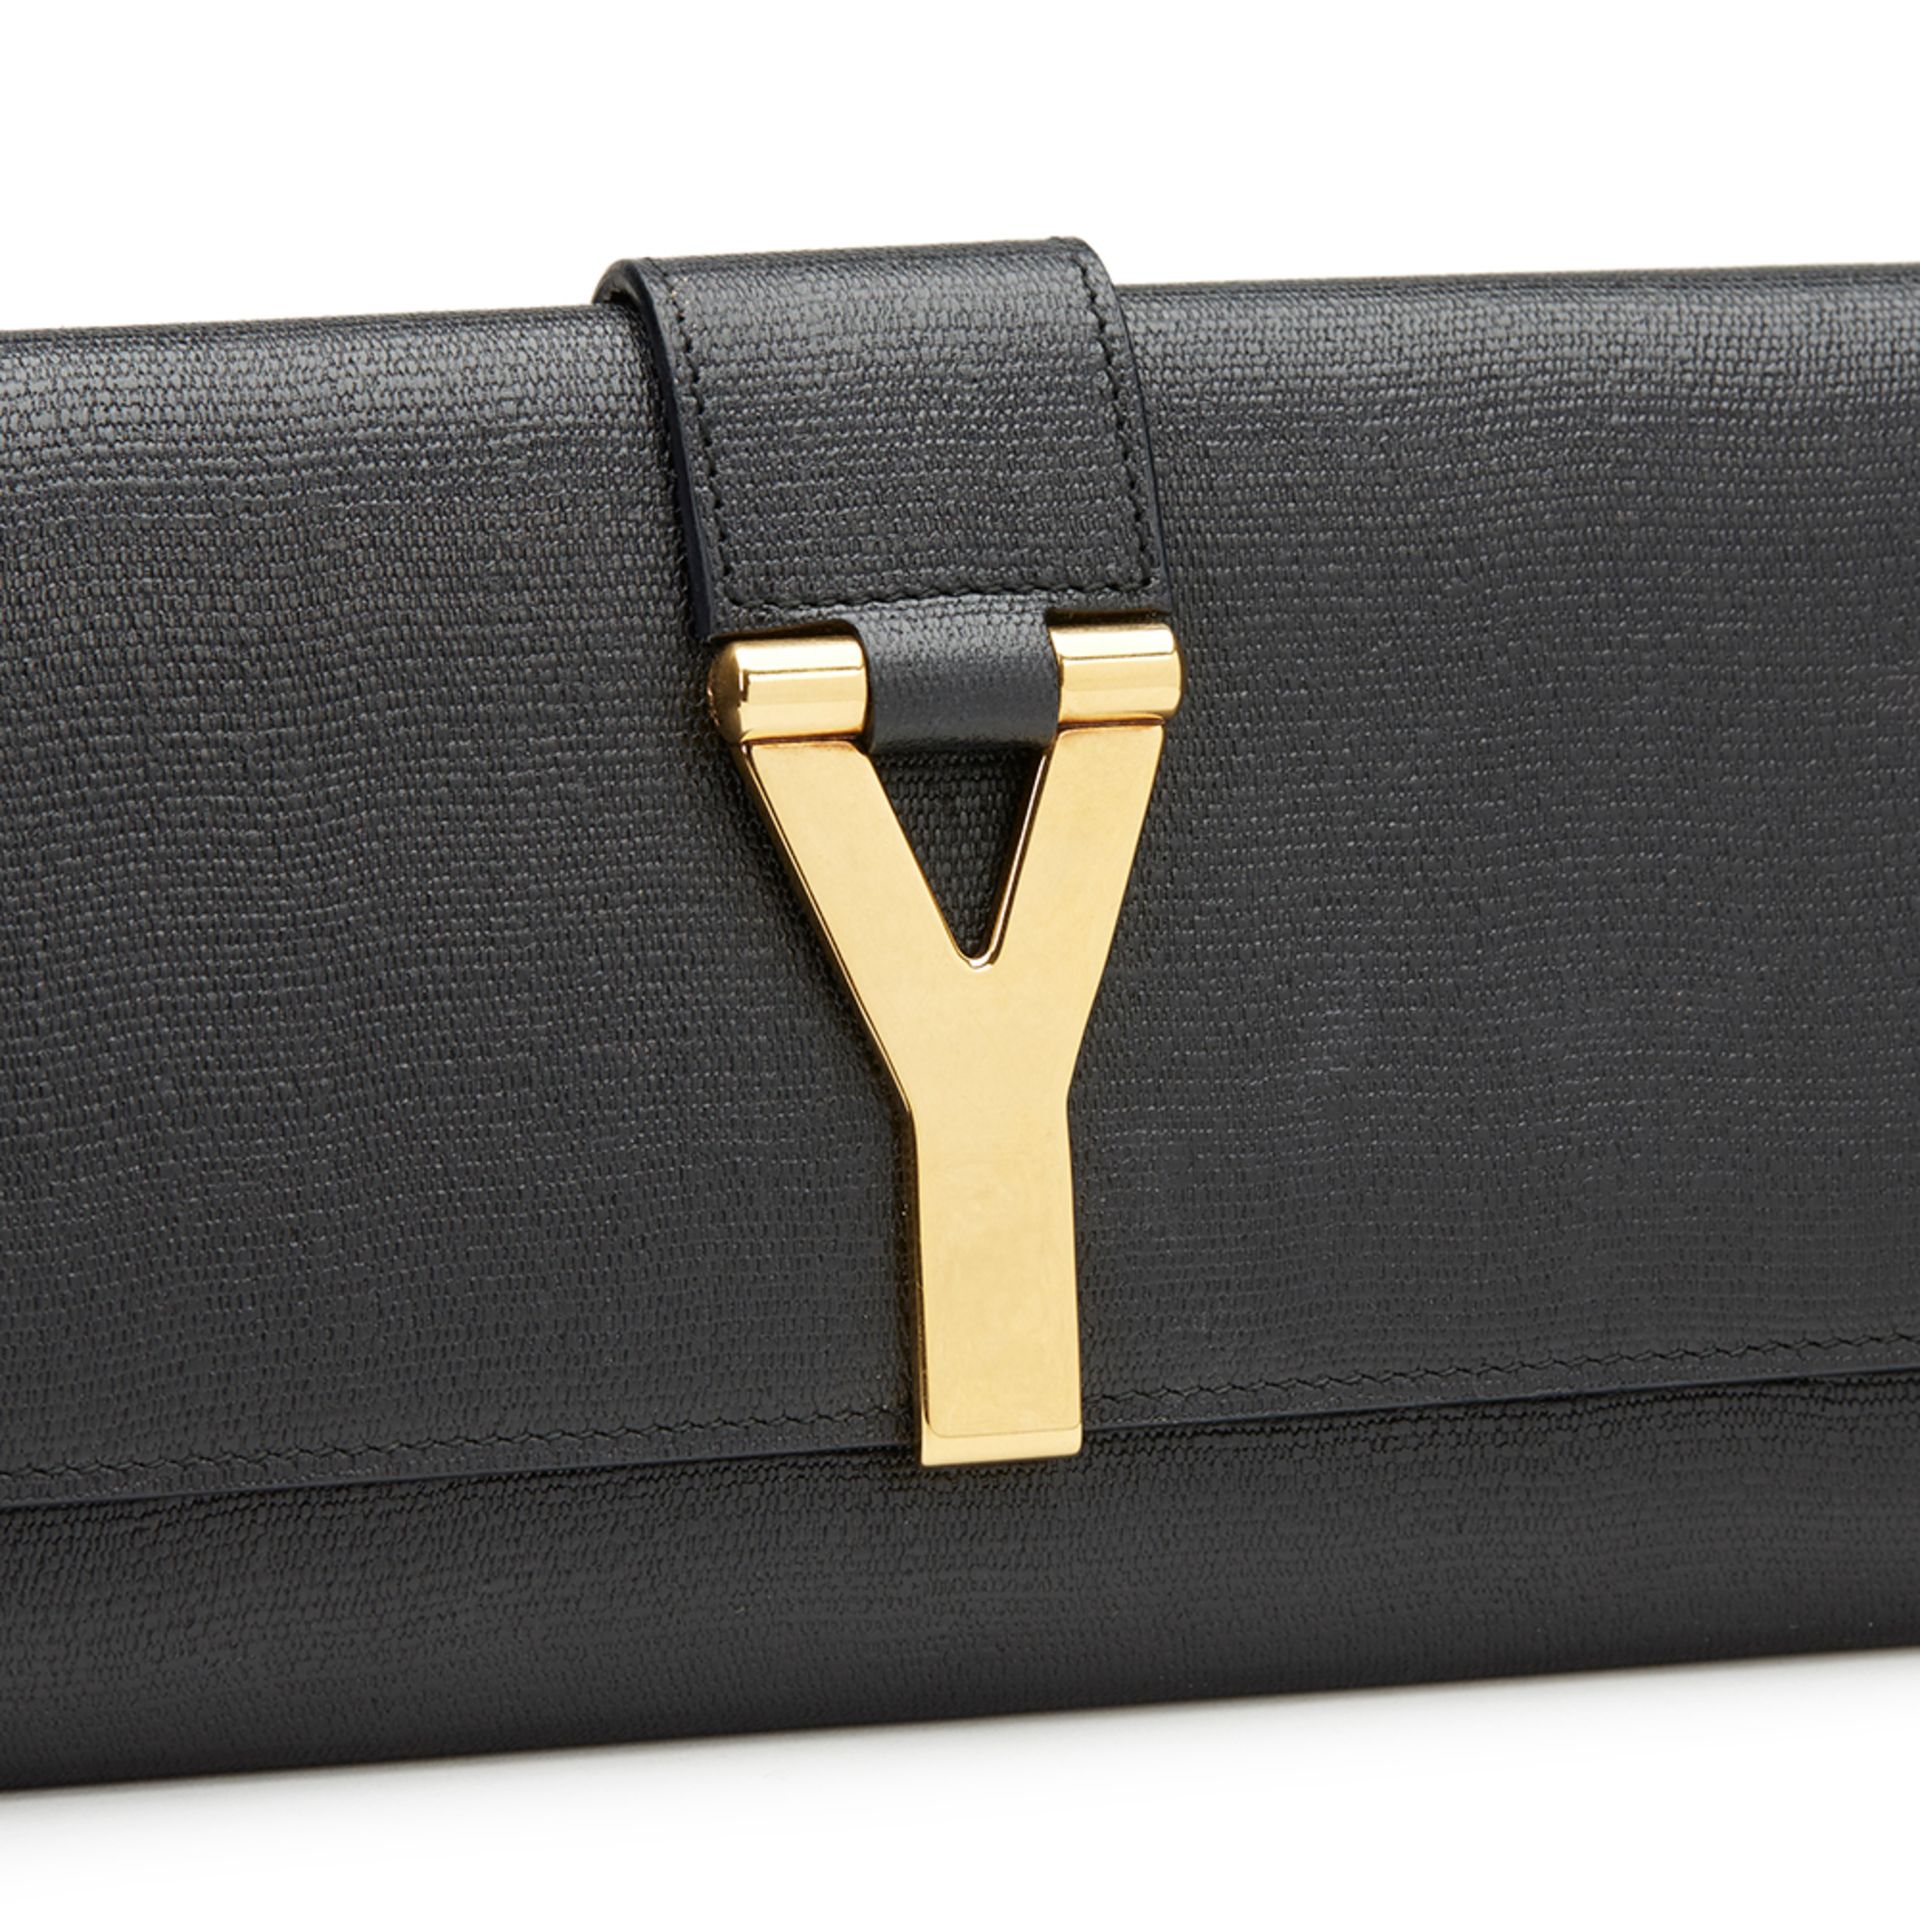 Black Grained Calfskin Classic Y Clutch - Image 7 of 10